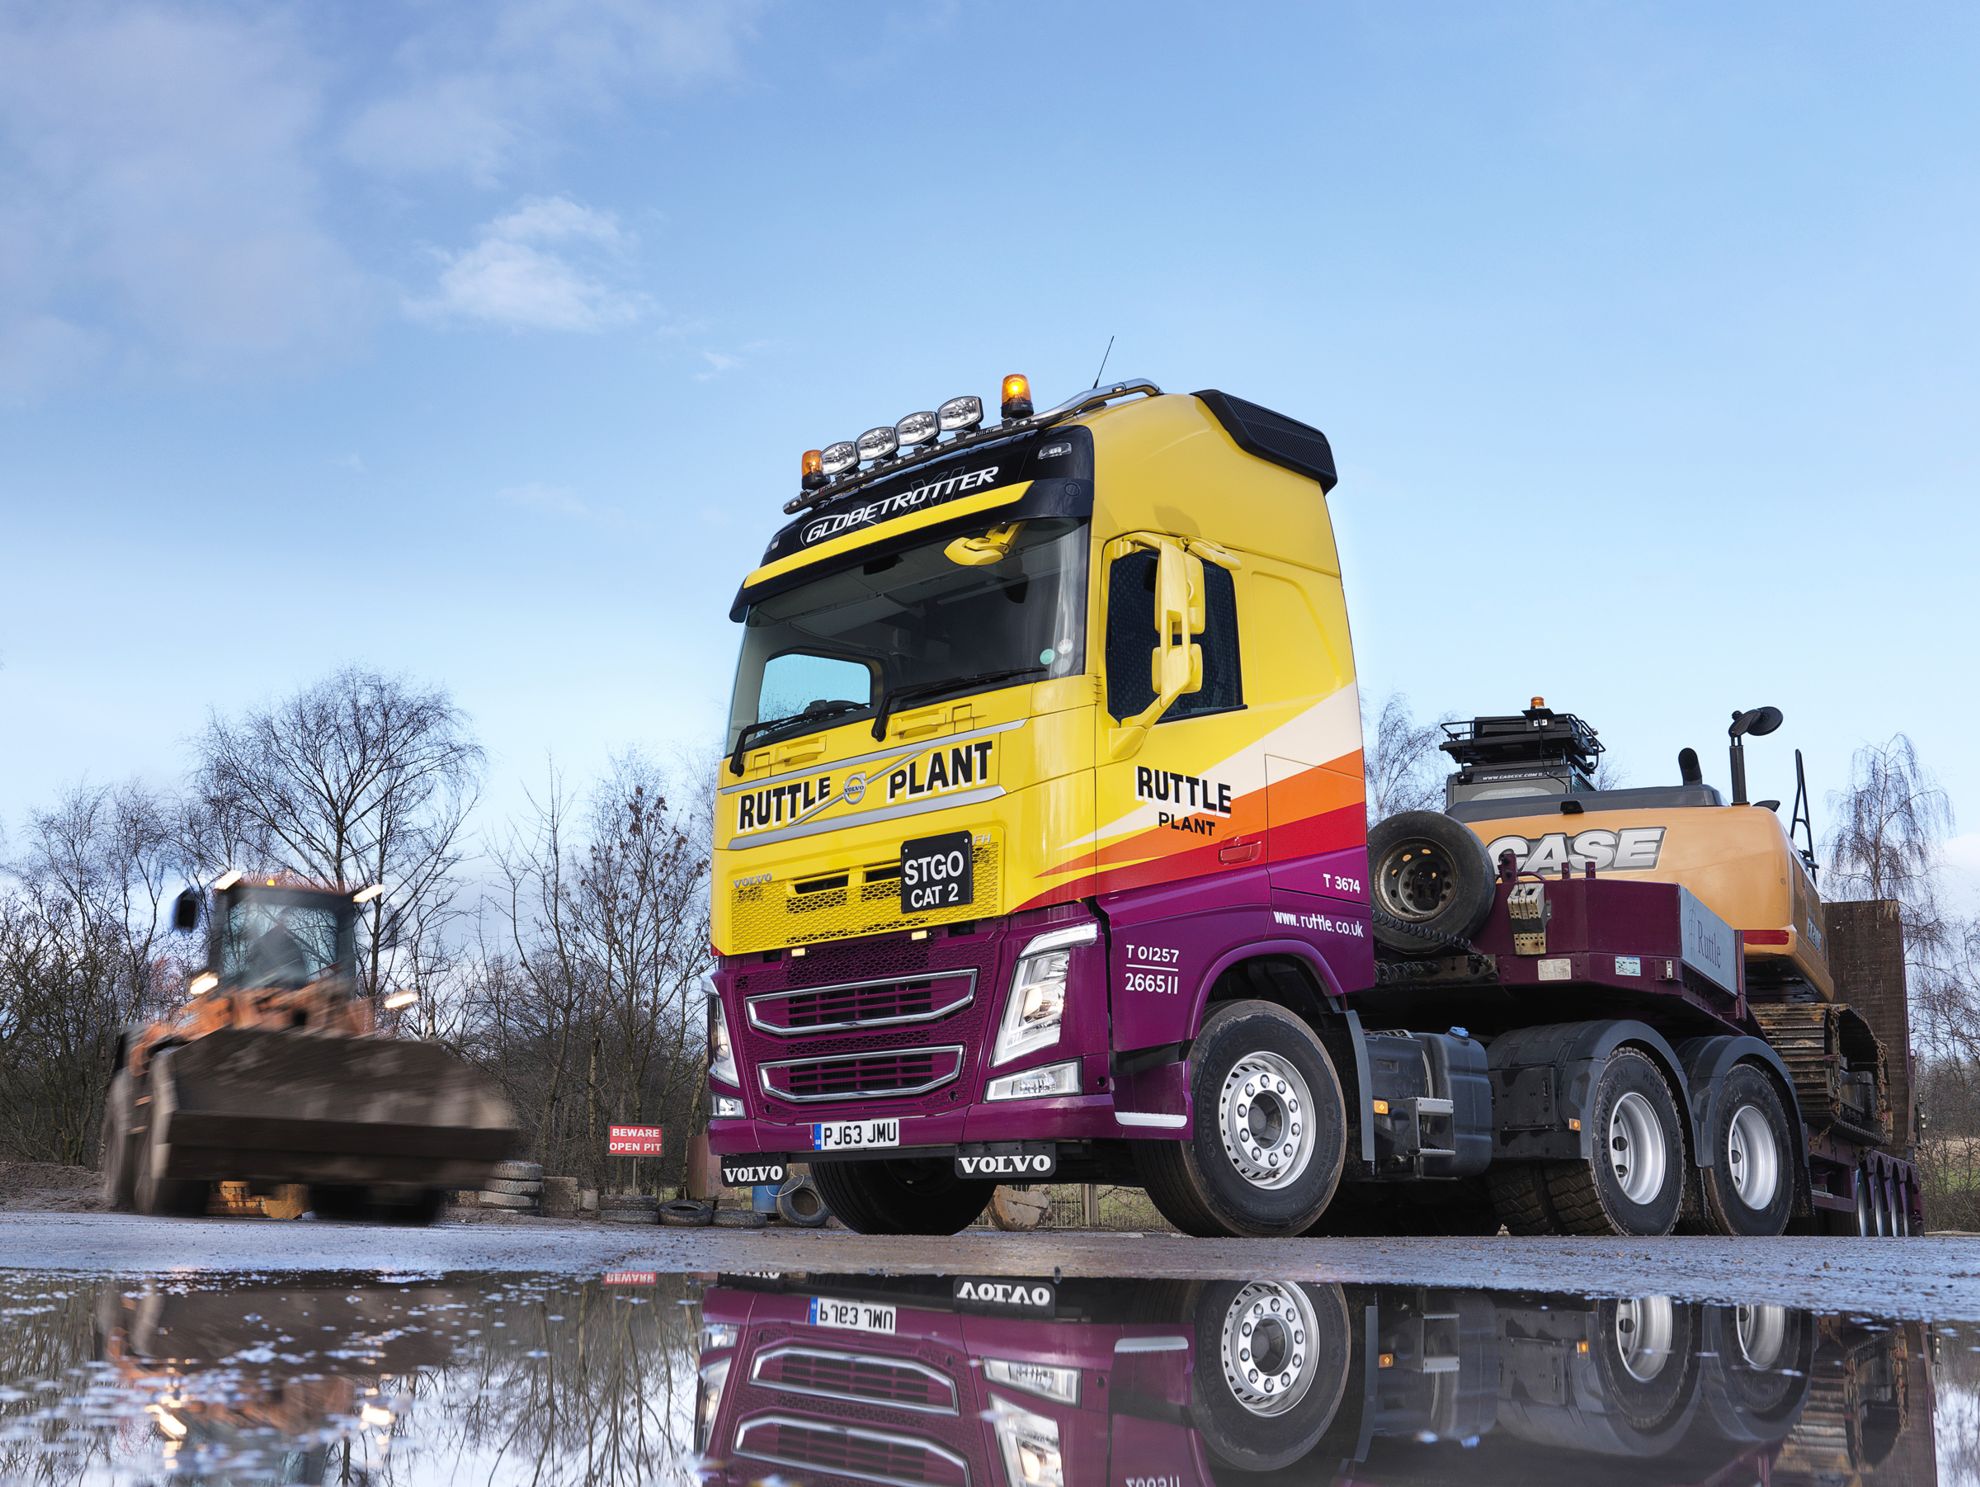 NEW VOLVO FH TRUCK FOR HEAVY HAULAGE SPECIALIST RUTTLE PLANT